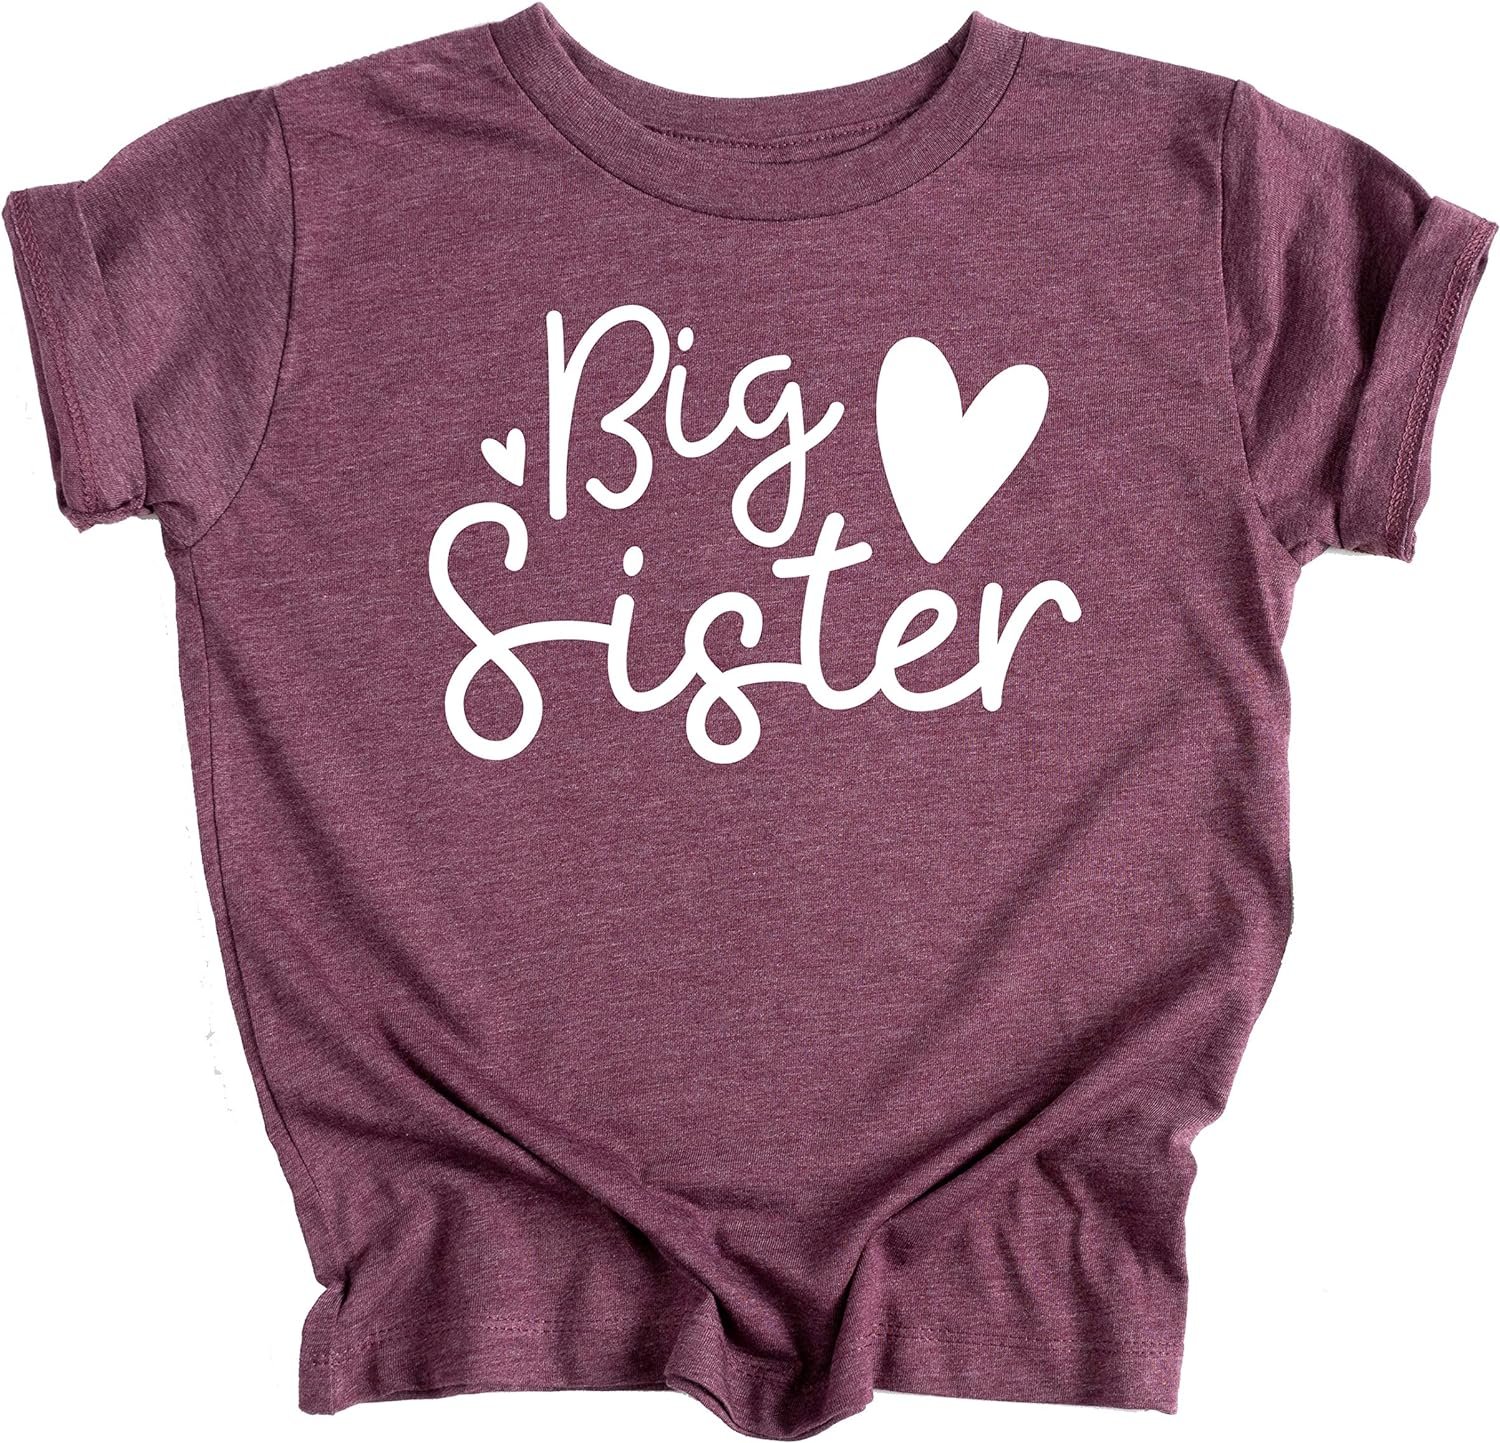 ELLA COLE COMPANY Big Sister Announcement T-Shirt for Toddler Girl- Luxury Cotton Blend Big Sister Shirt